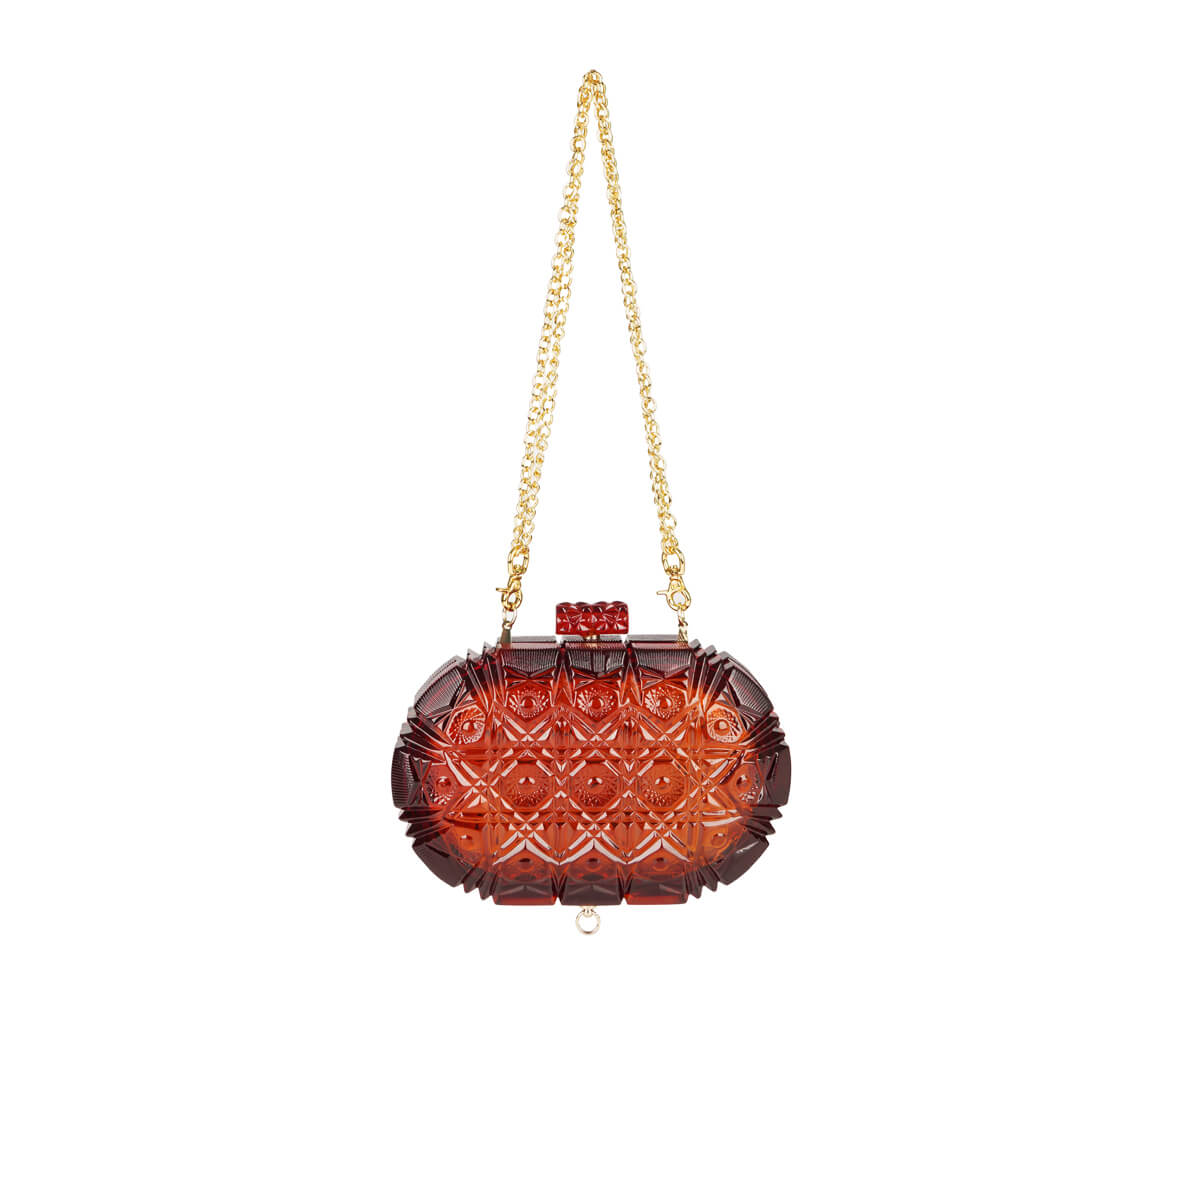 NEW IN Edged Oval Clutch Amber